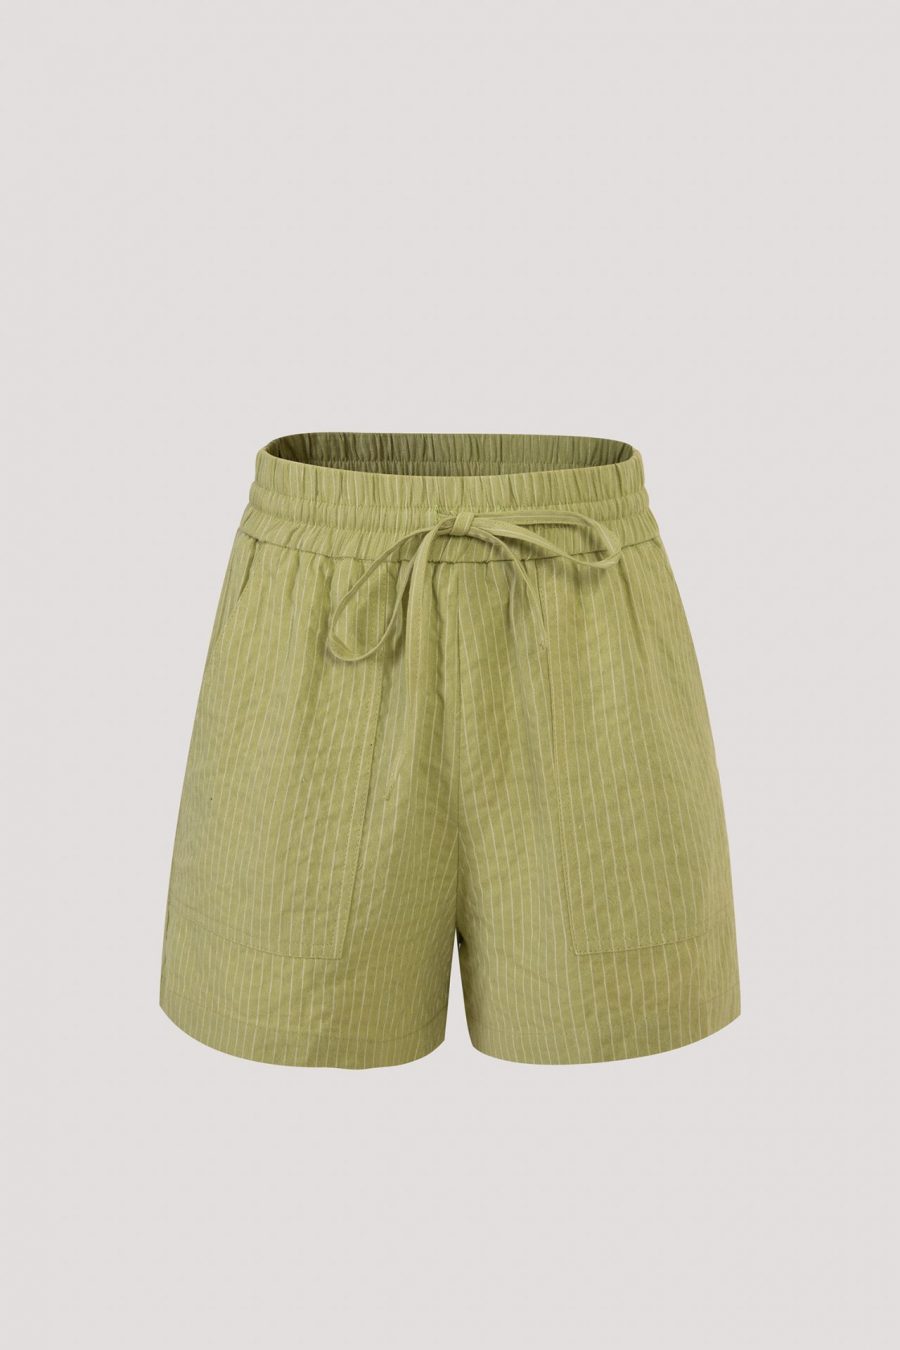 CPS000775A COTTON STRIPED PULL UP SHORTS APPLE GREEN STRIPES